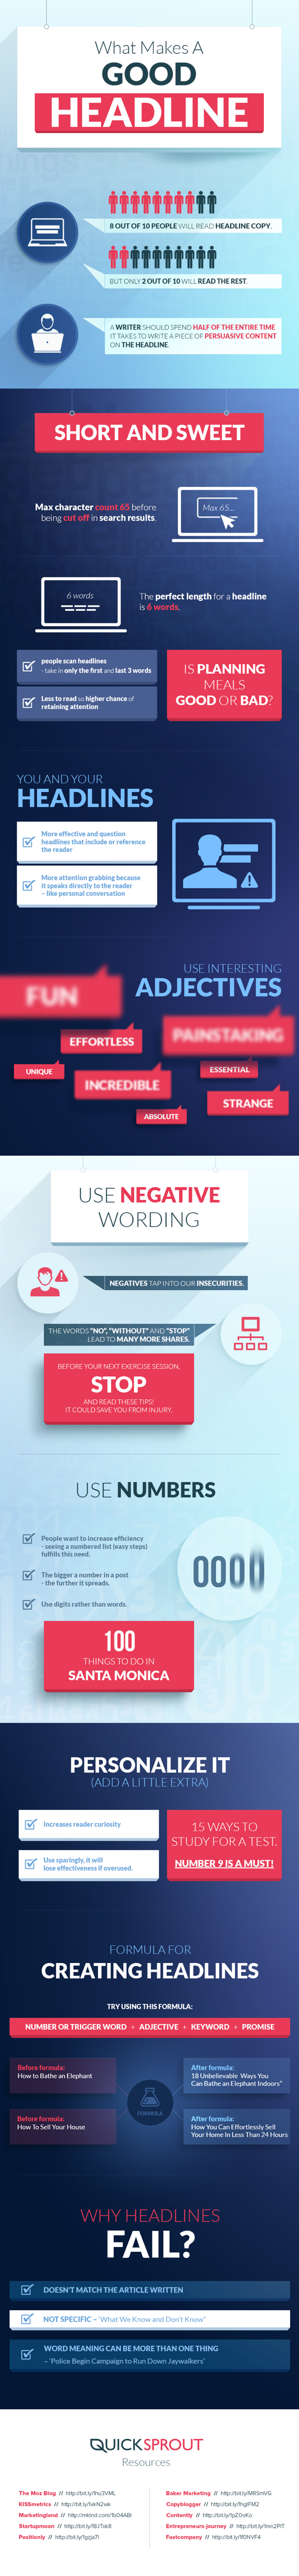 How to Write Headlines That Convert Infographic image